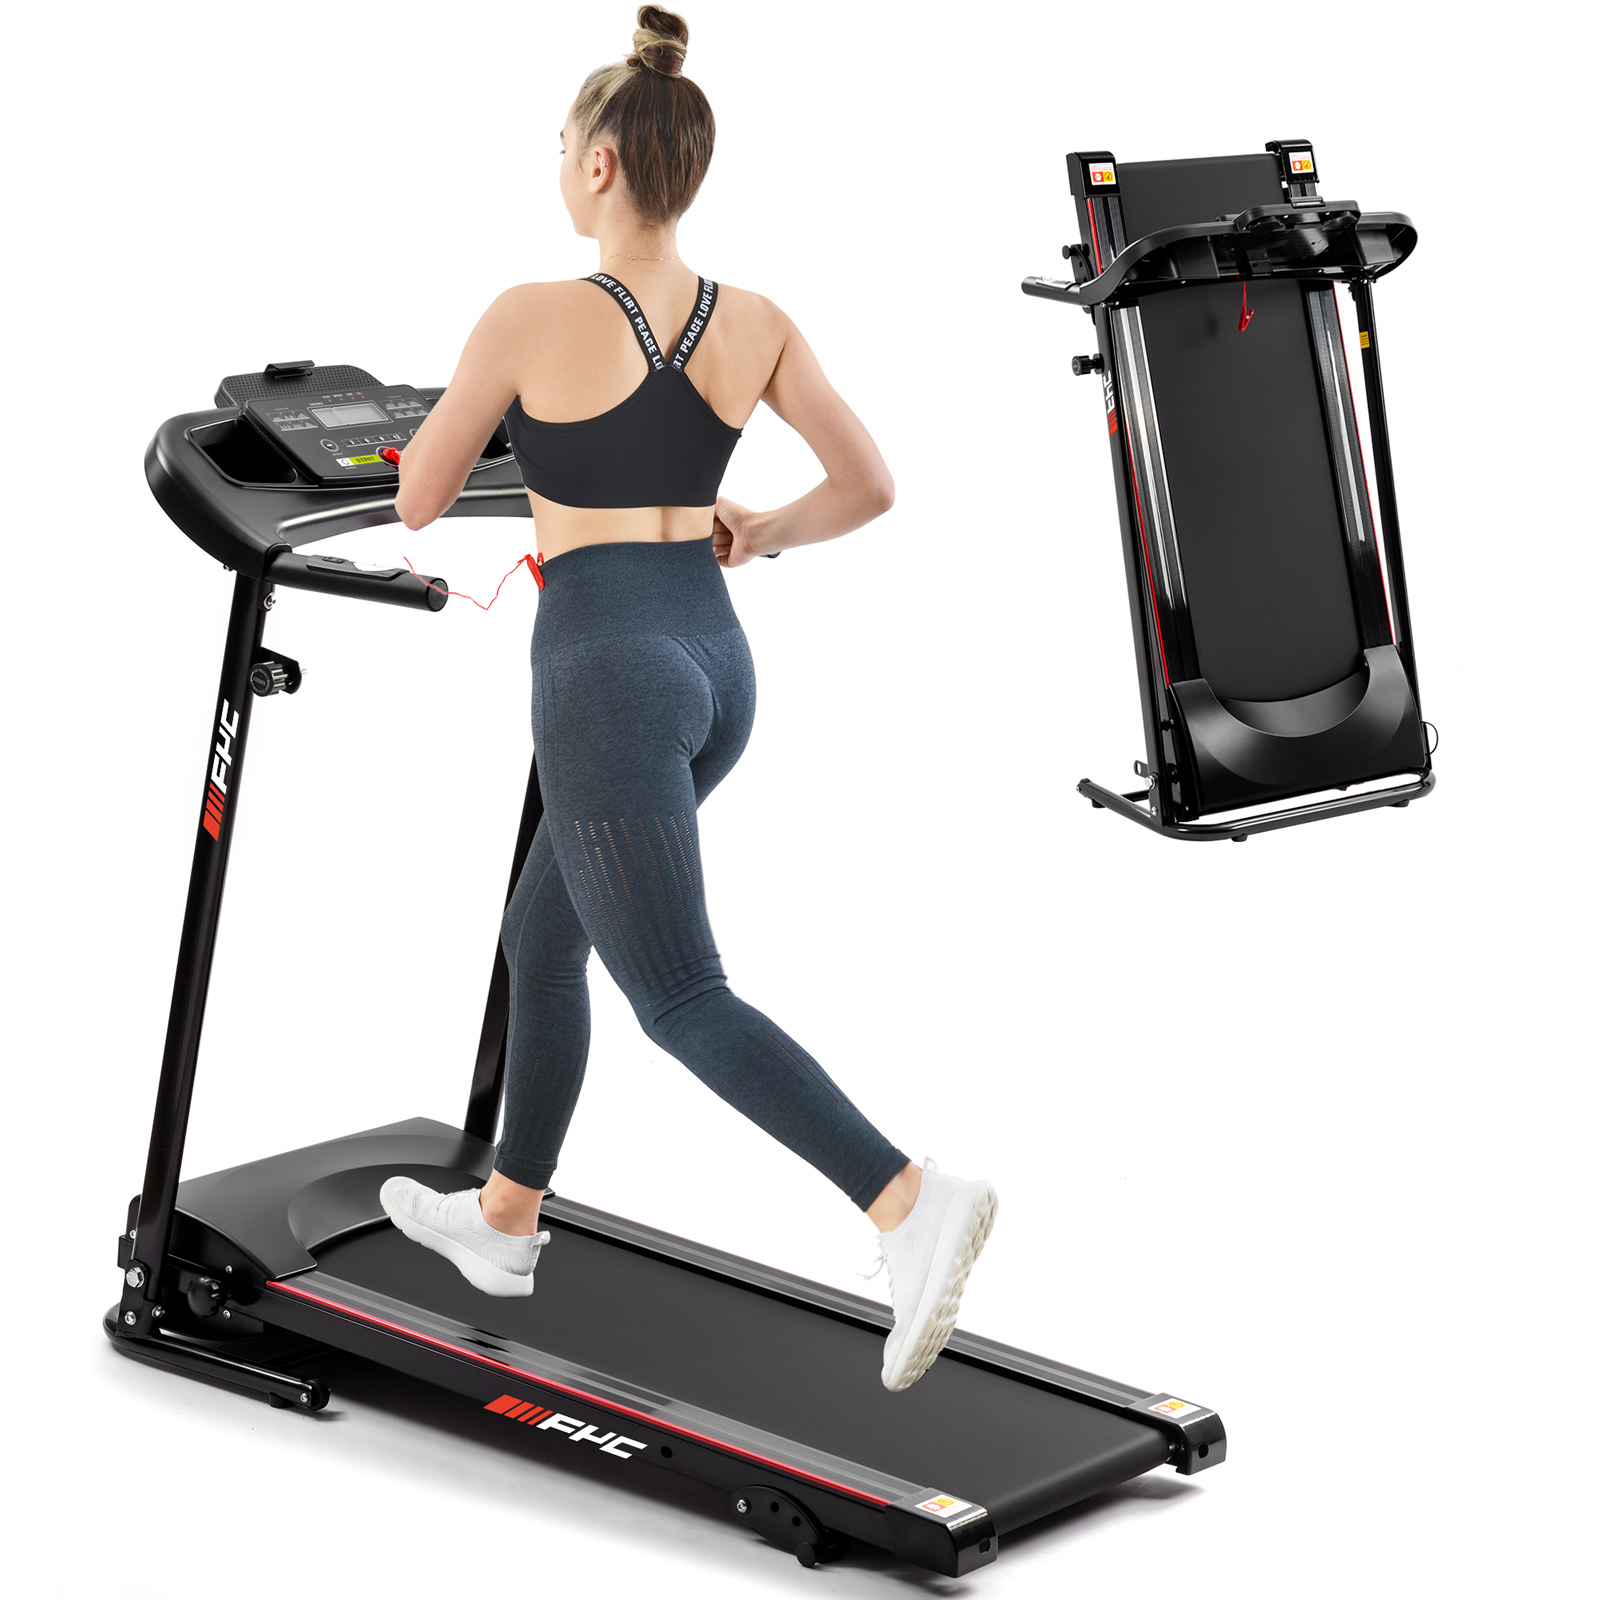 FYC Folding Treadmill for Home with Bluetooth &Incline, Electric Treadmill Running Exercise